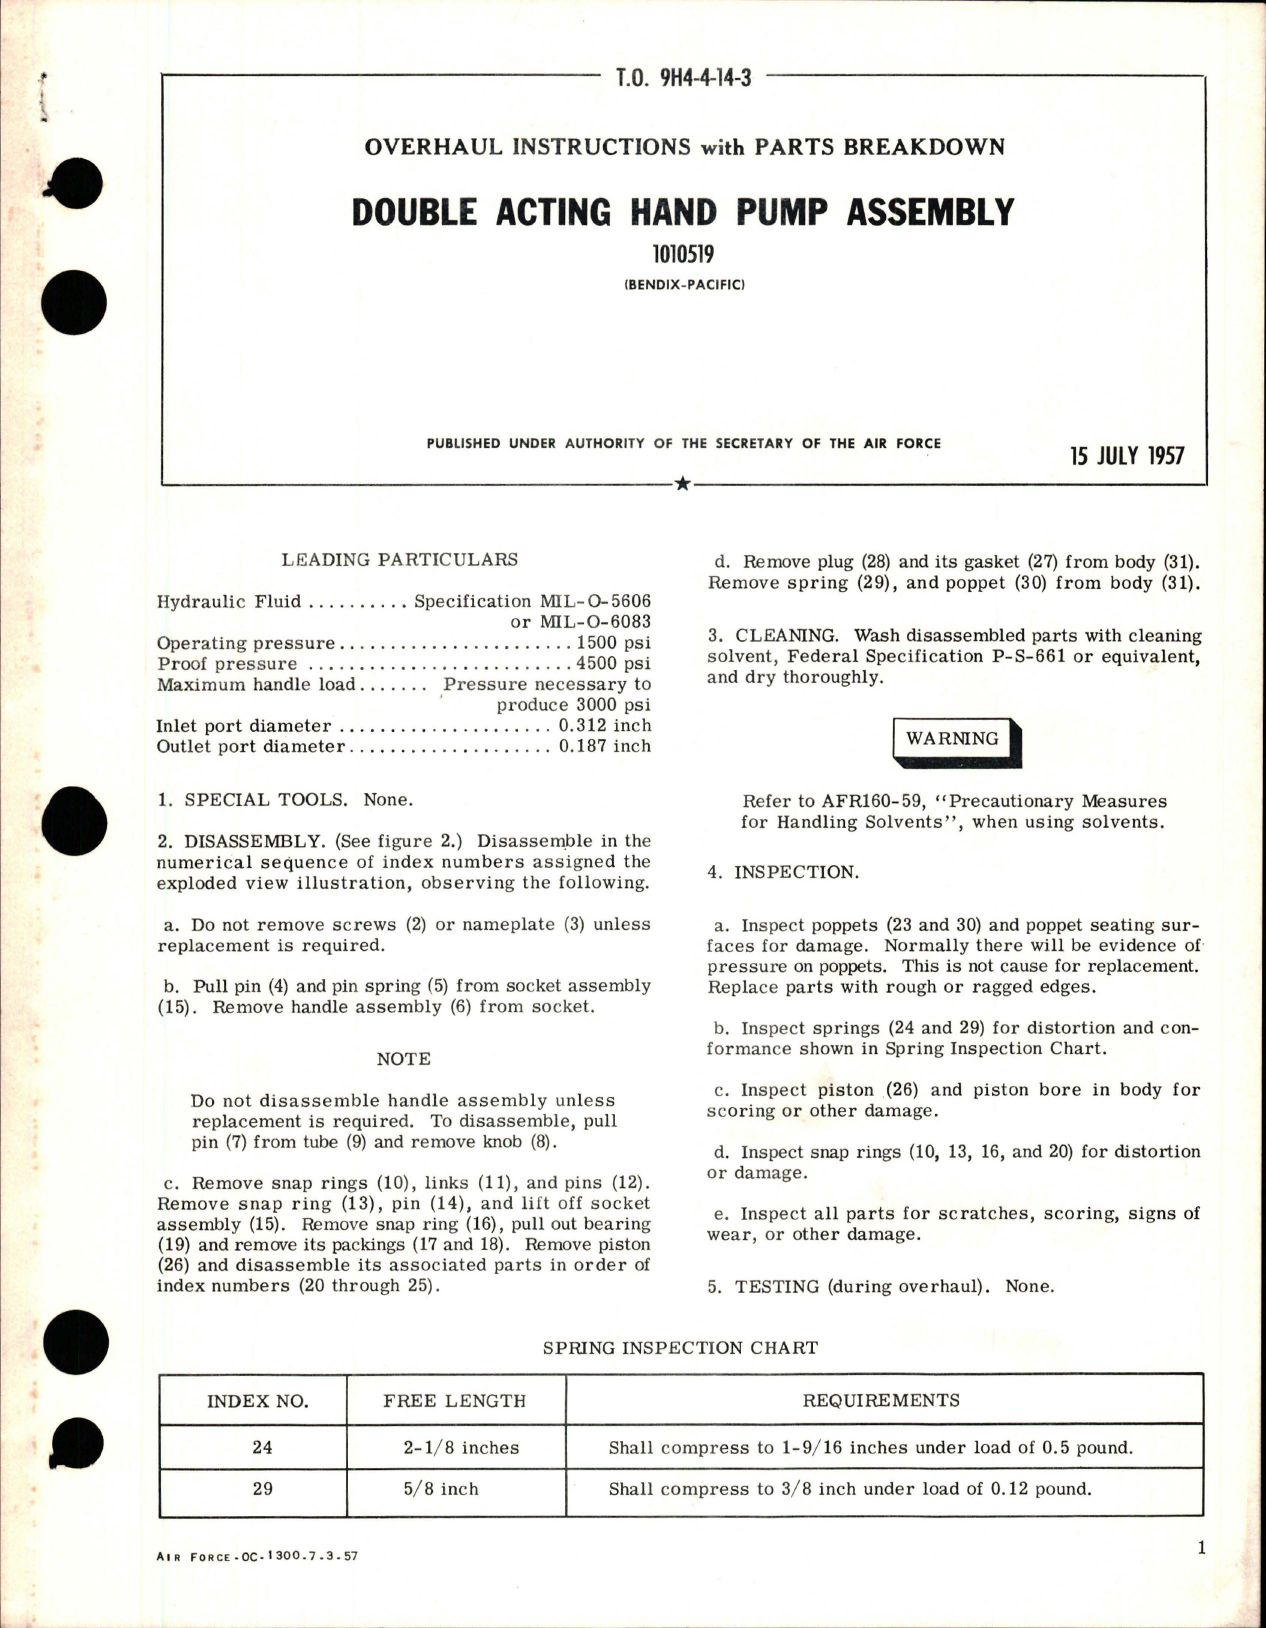 Sample page 1 from AirCorps Library document: Overhaul Instructions with Parts Breakdown for Double Acting Hand Pump Assembly - 1010519